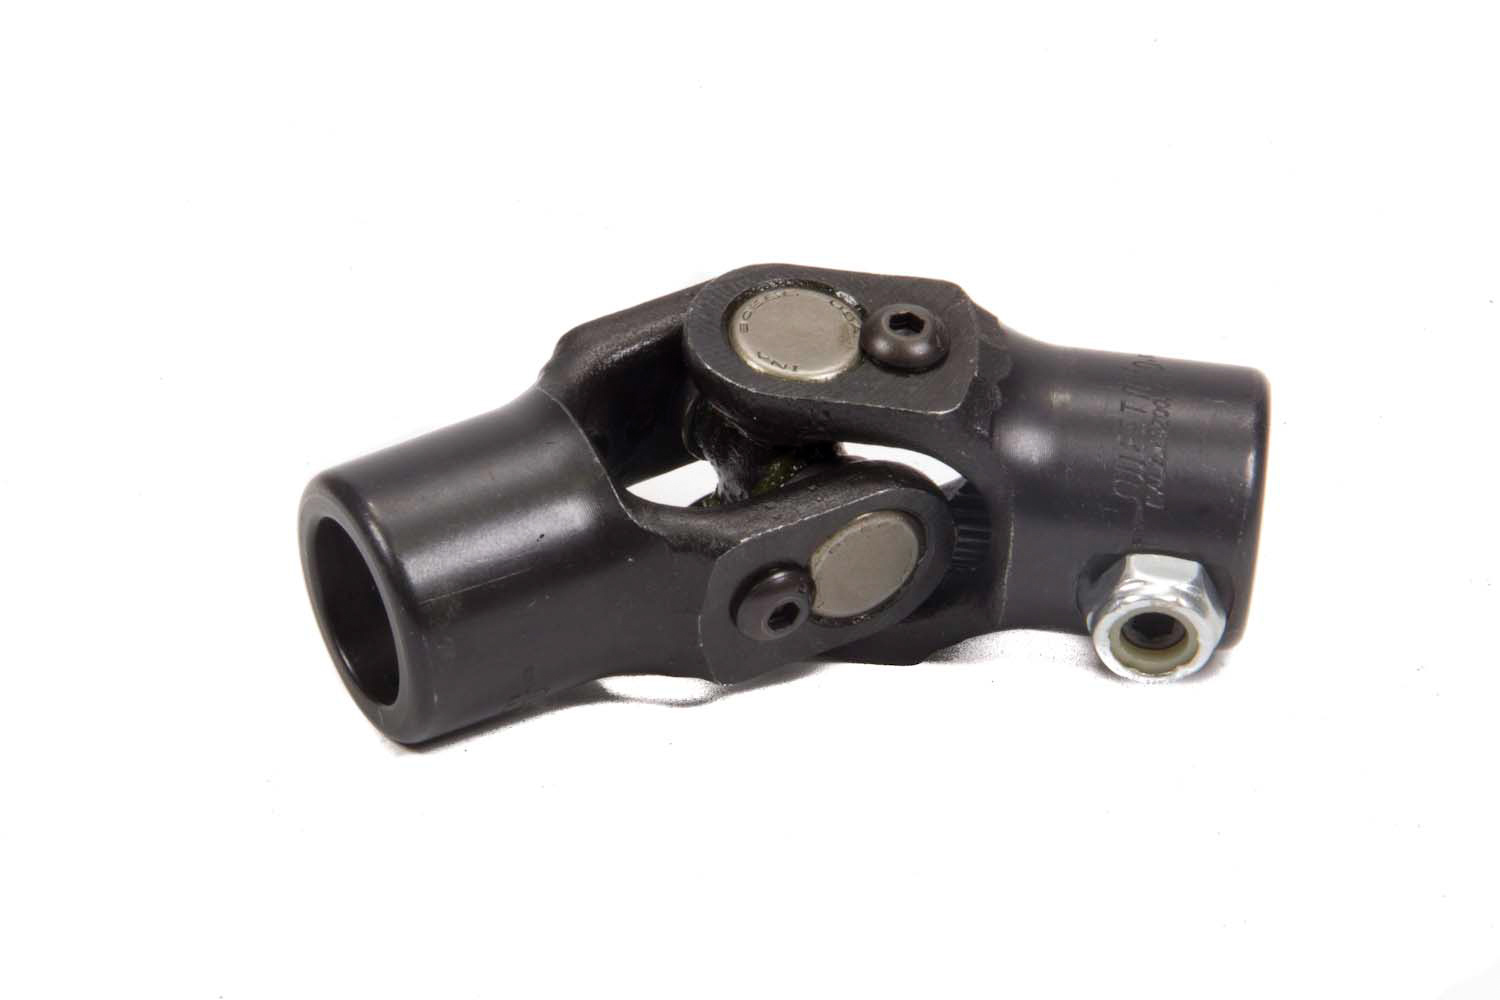 Sweet Manufacturing 401-50619 Steering Universal Joint, Single Joint, 3/4 in Smooth Bore to 3/4 in Double D, Steel, Black Paint, Each